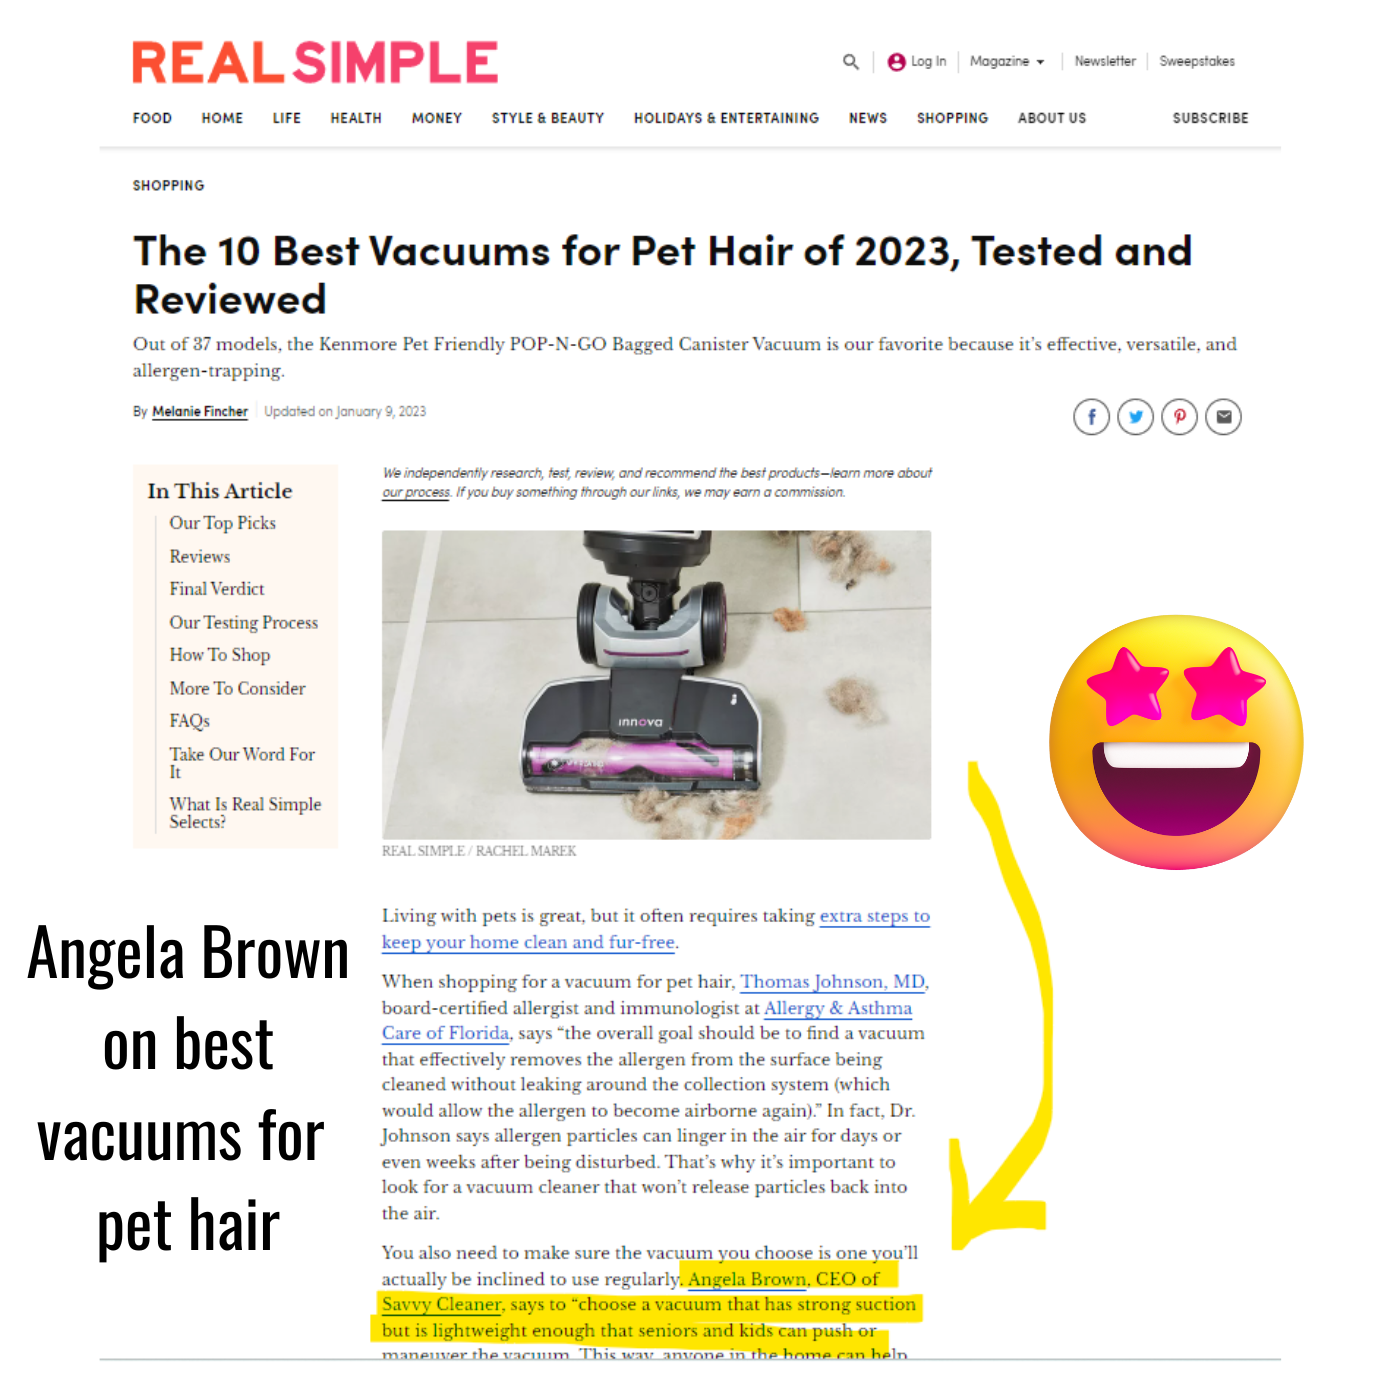 Angela Brown Melanie Fincher Collaborate on Best Vacuums for 2023 for Pet Hair